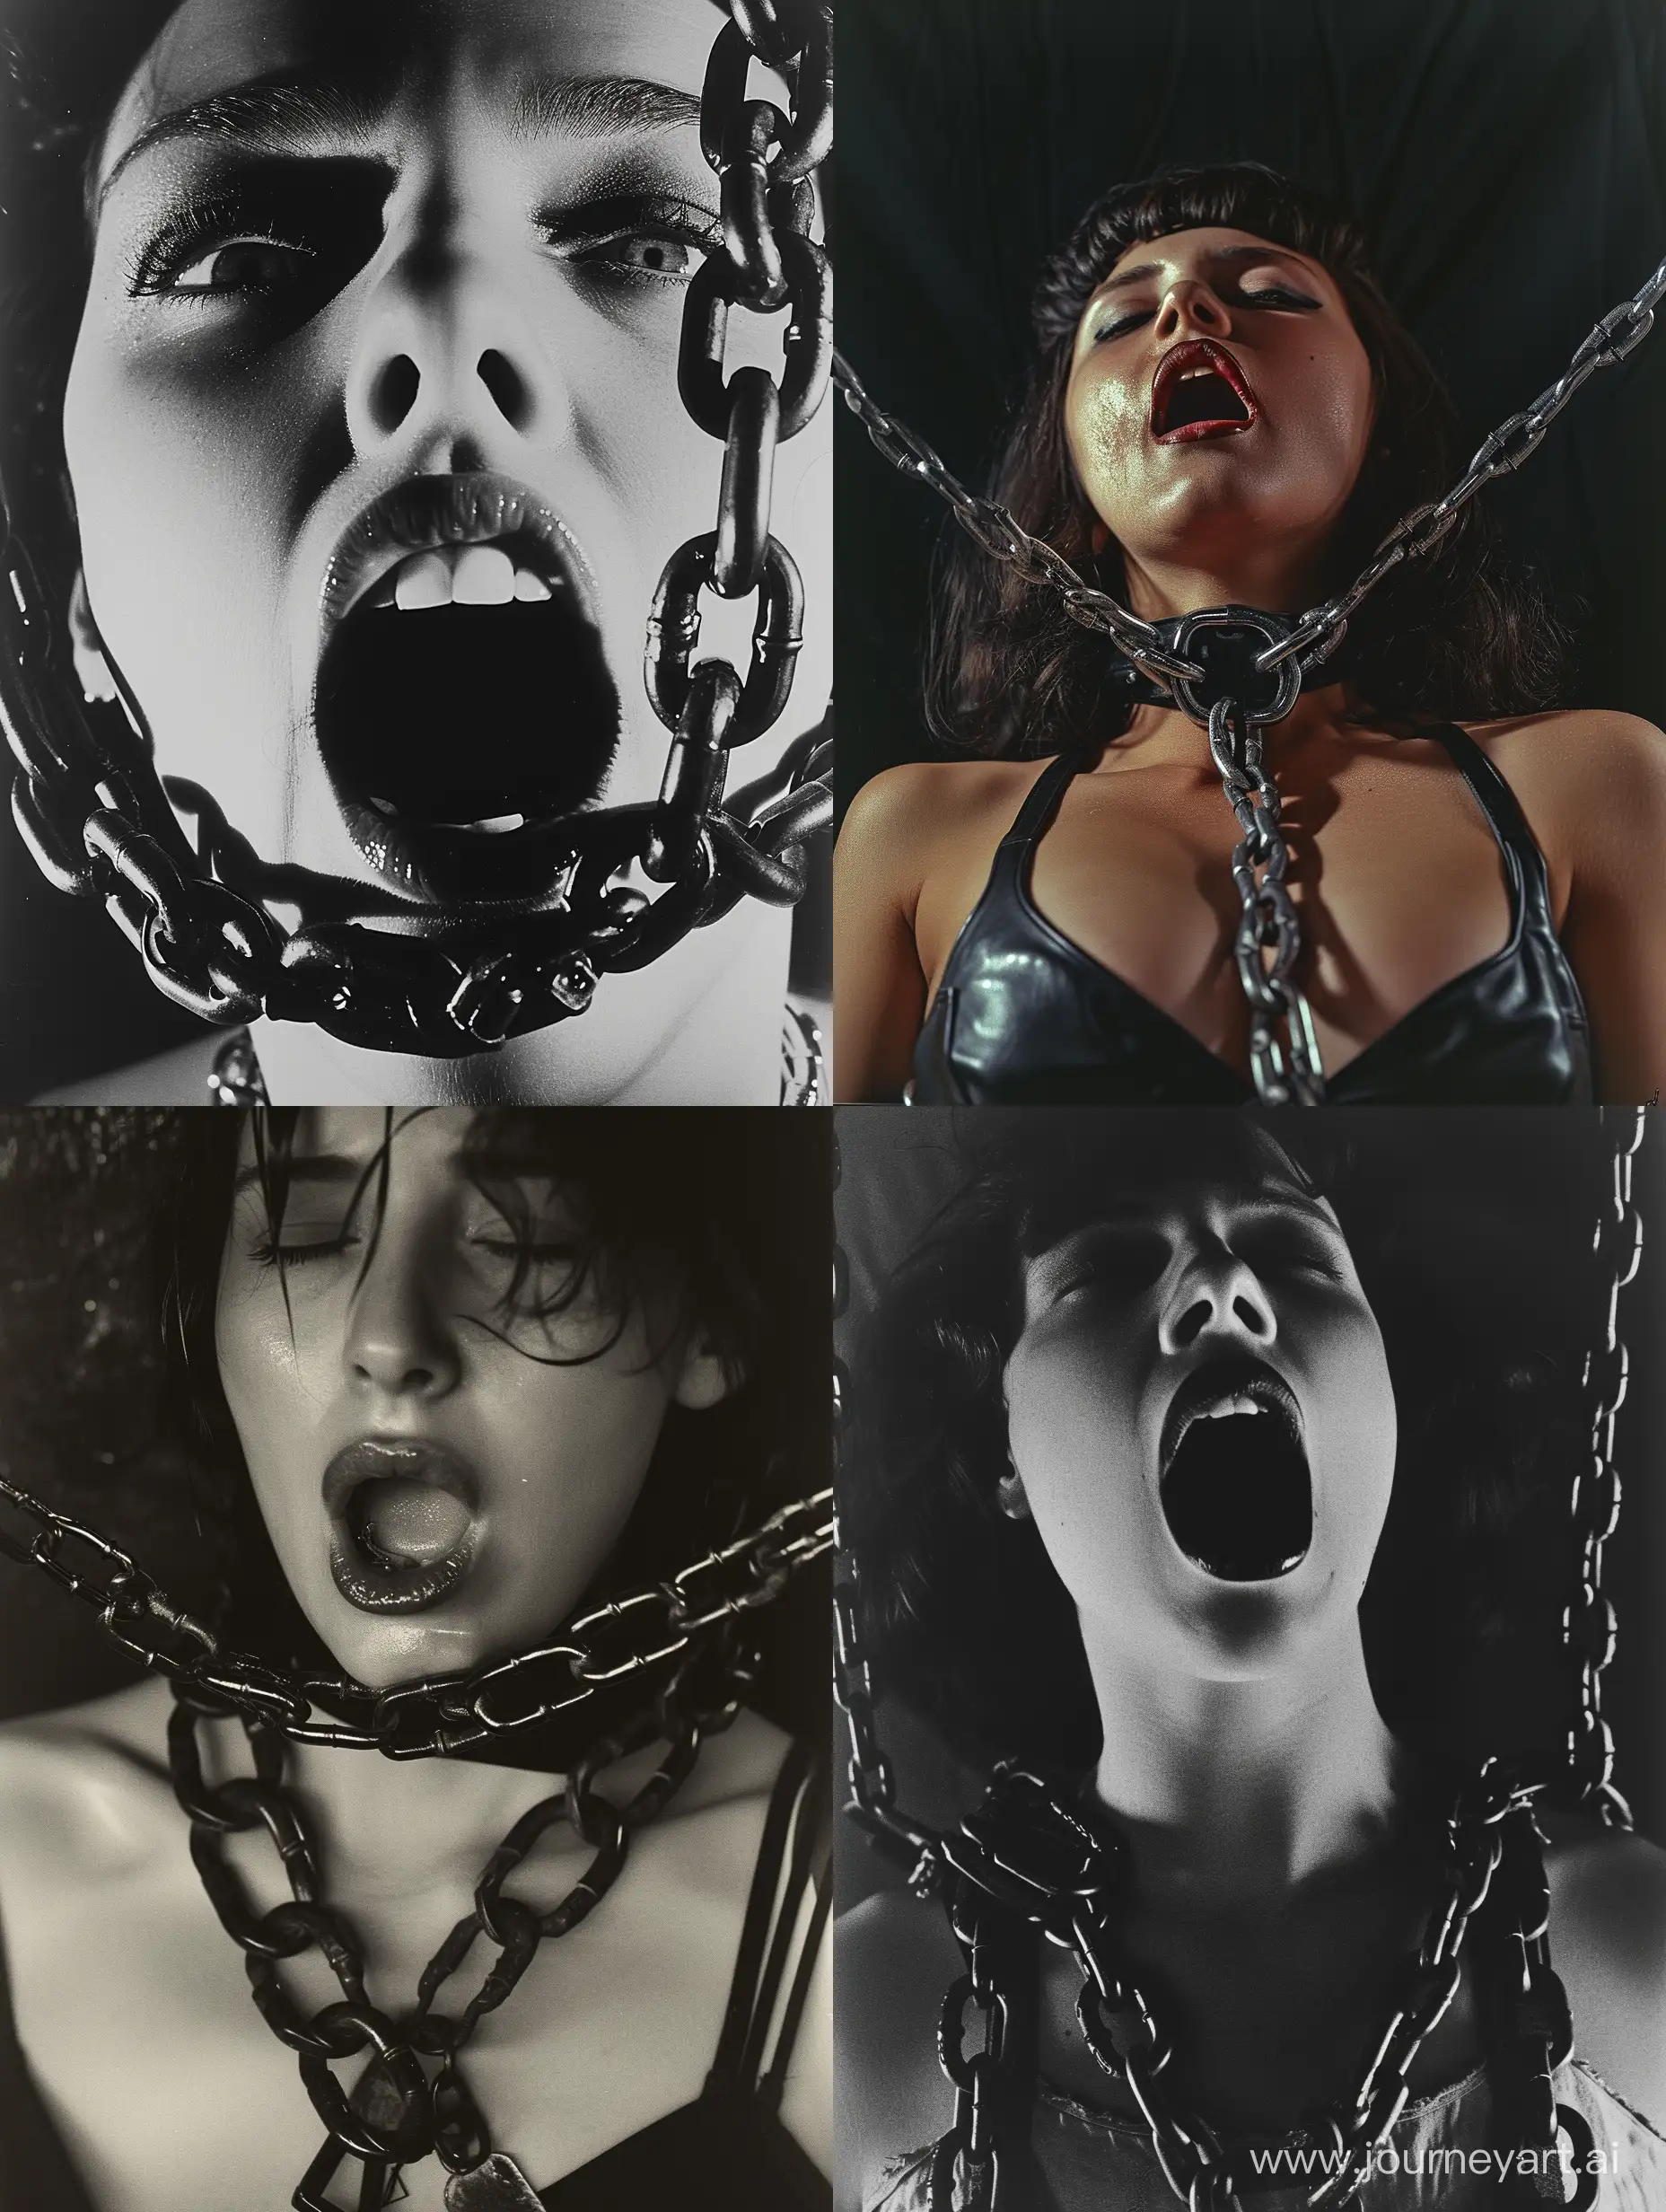 Provocative-Portrait-Woman-Unleashed-with-Chains-and-Harness-in-Saturated-Colors